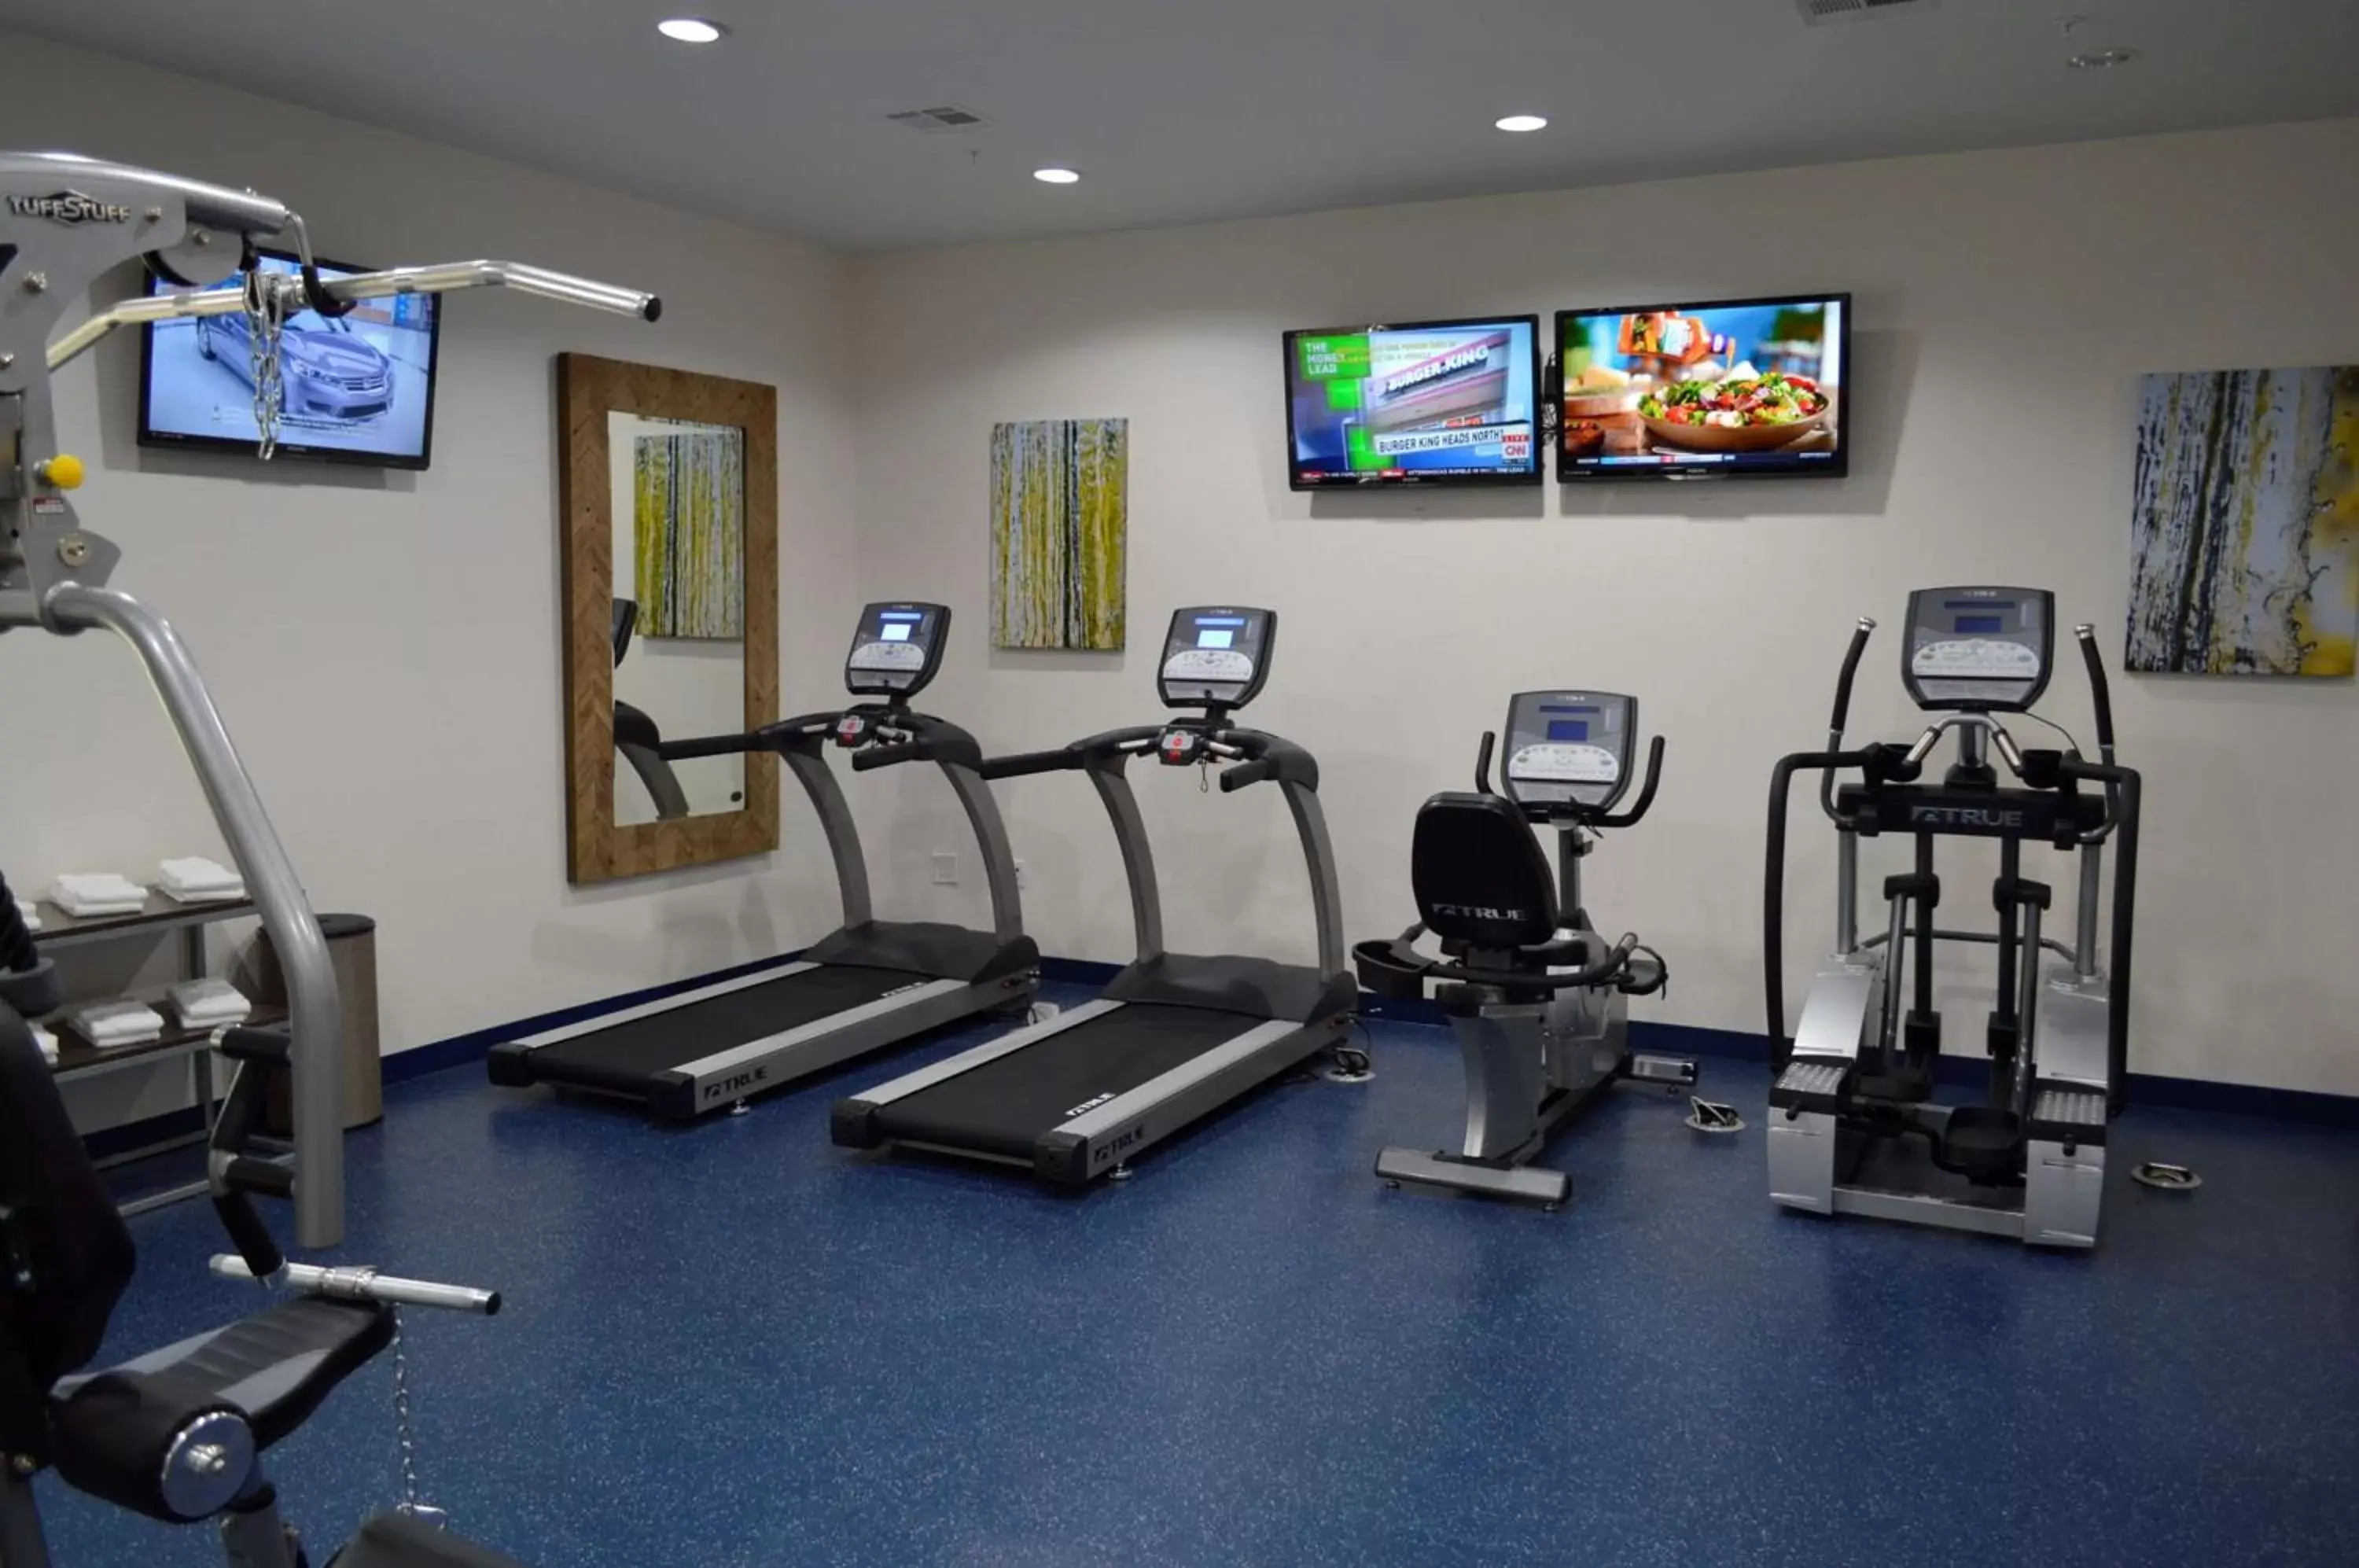 Fitness centre/facilities, Fitness Center/Facilities in Best Western Premier Ashton Suites - Willowbrook